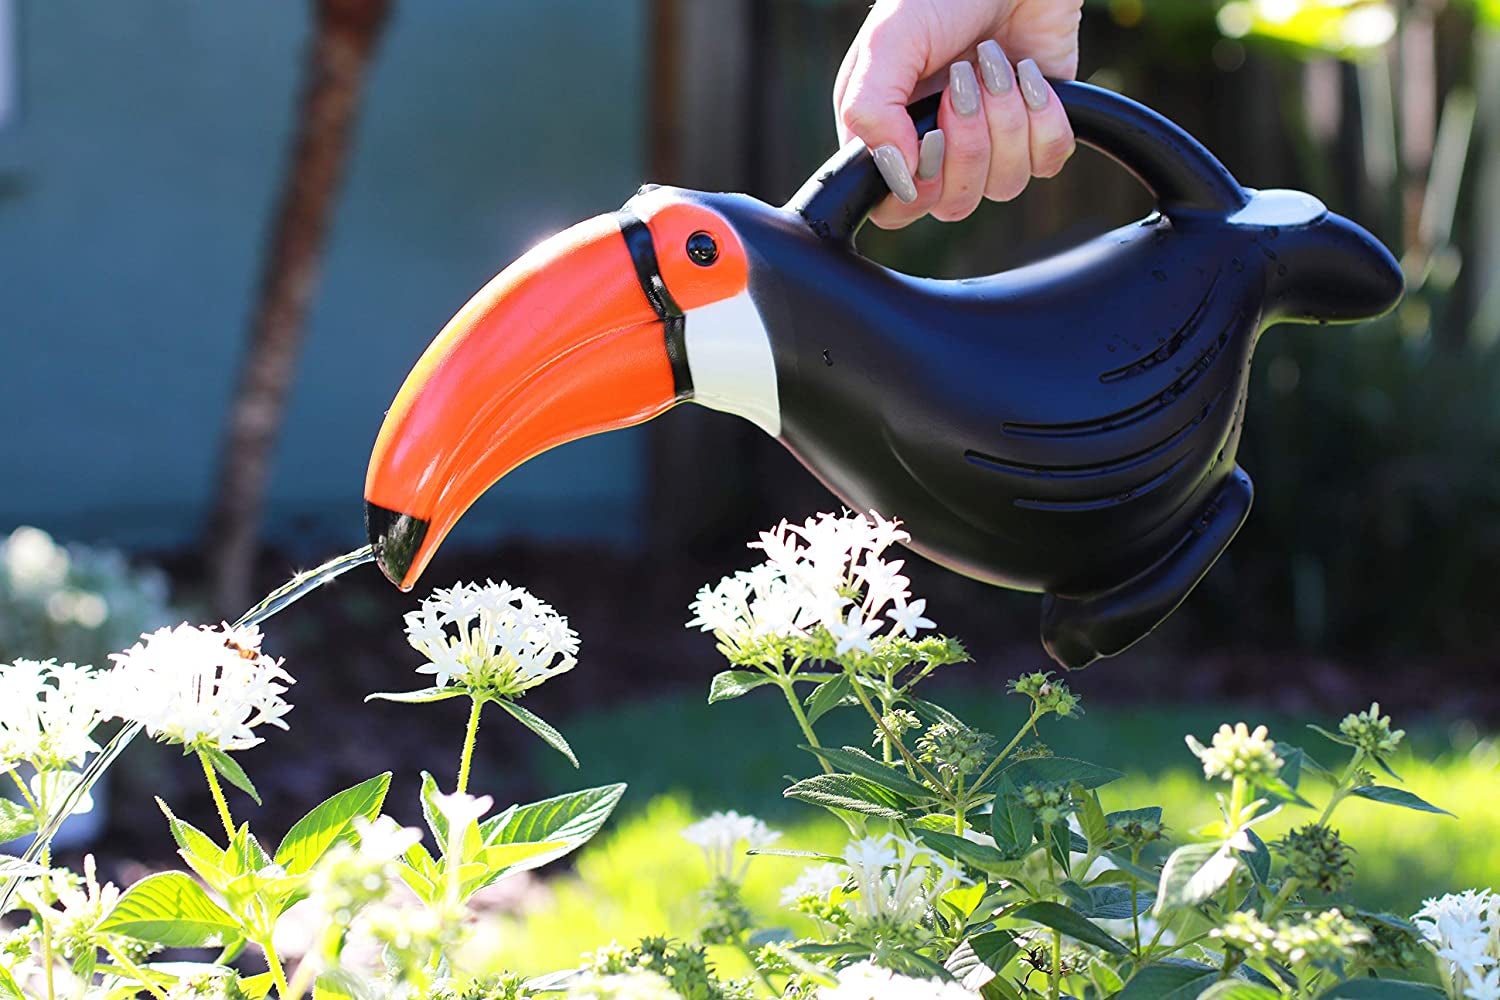 toucan watering can that spits water from beak 